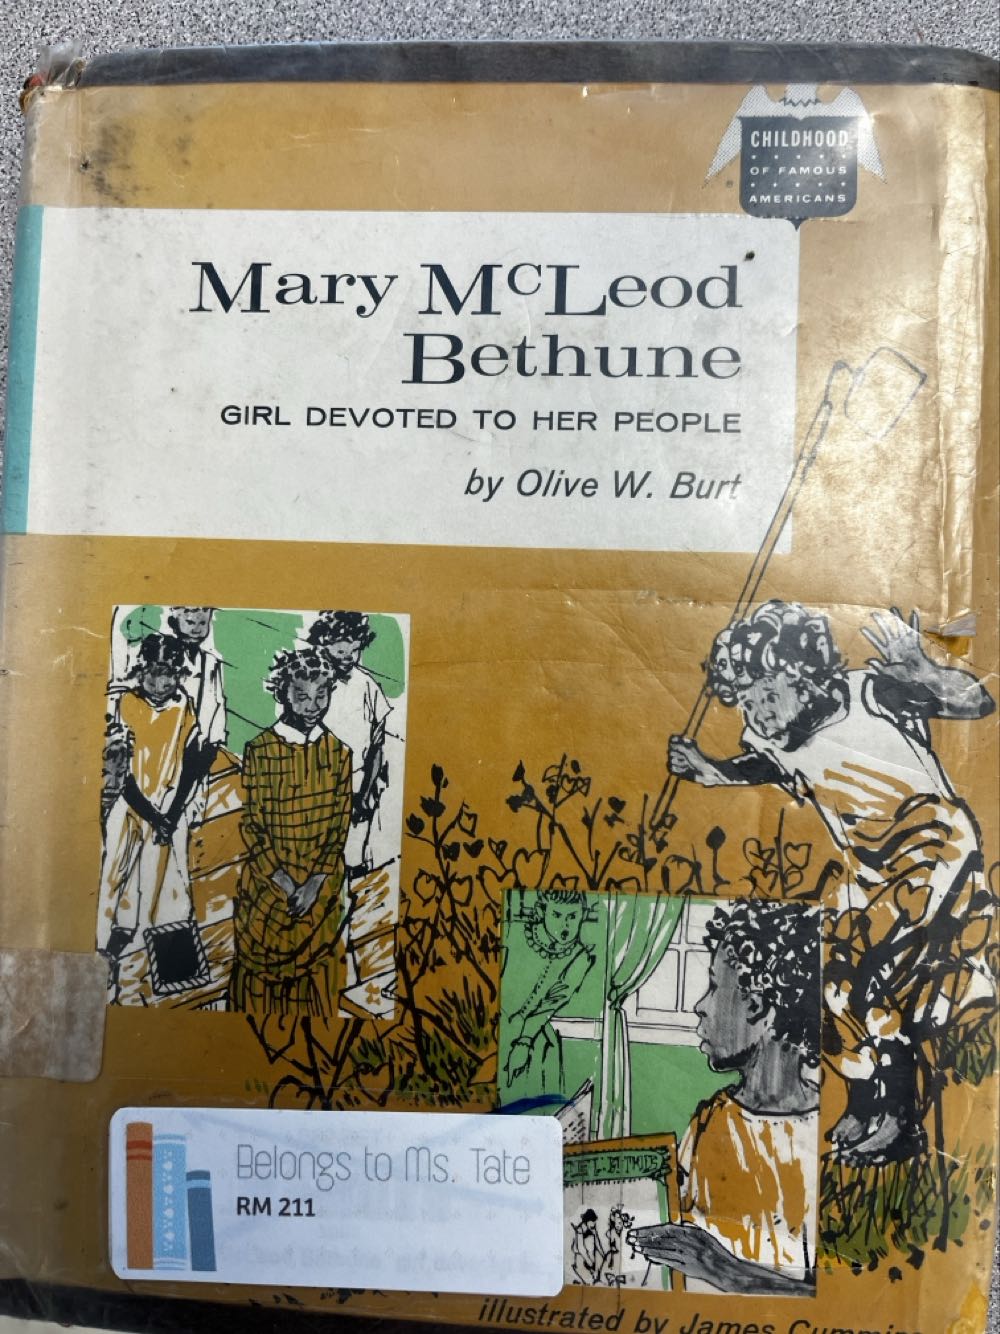 Mary McLeod Bethune - Olive W. Burt (The Bobbs-Merrill Co., Inc. - Hardcover) book collectible - Main Image 1